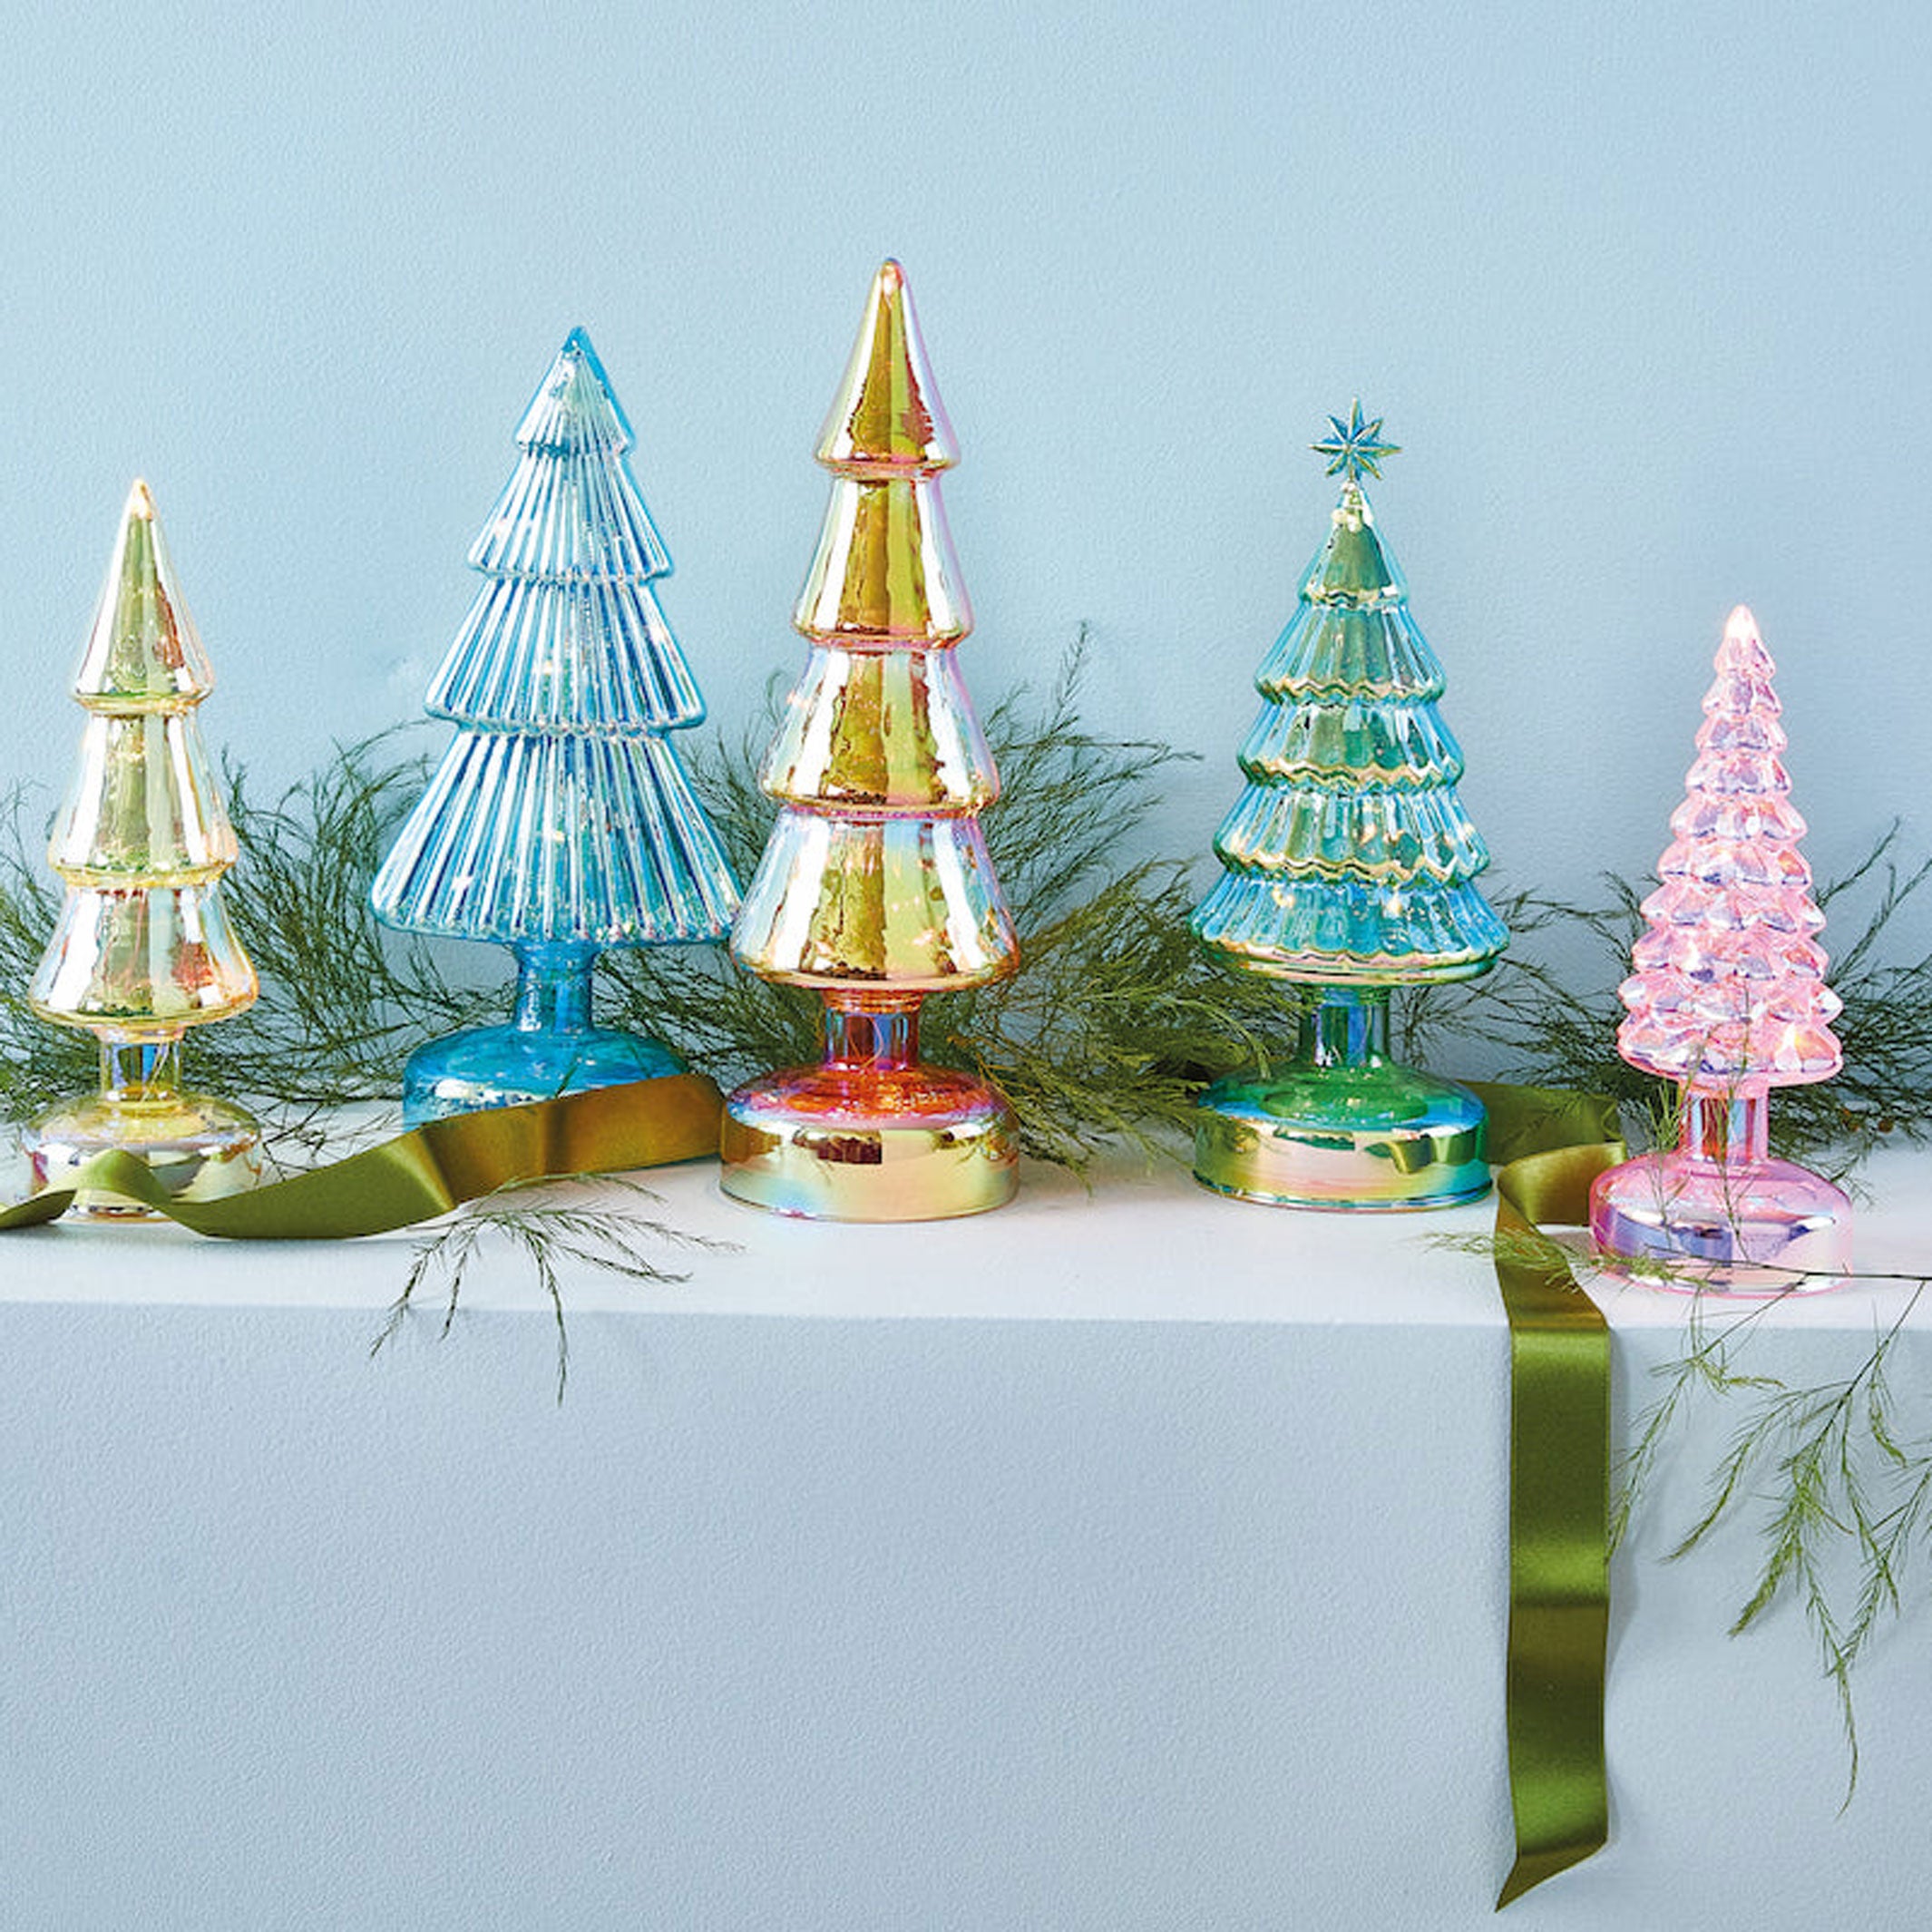 GLASS TREES Colorful Bele Small mit LED | LED LIGHTED Glas-TANNENBÄUME